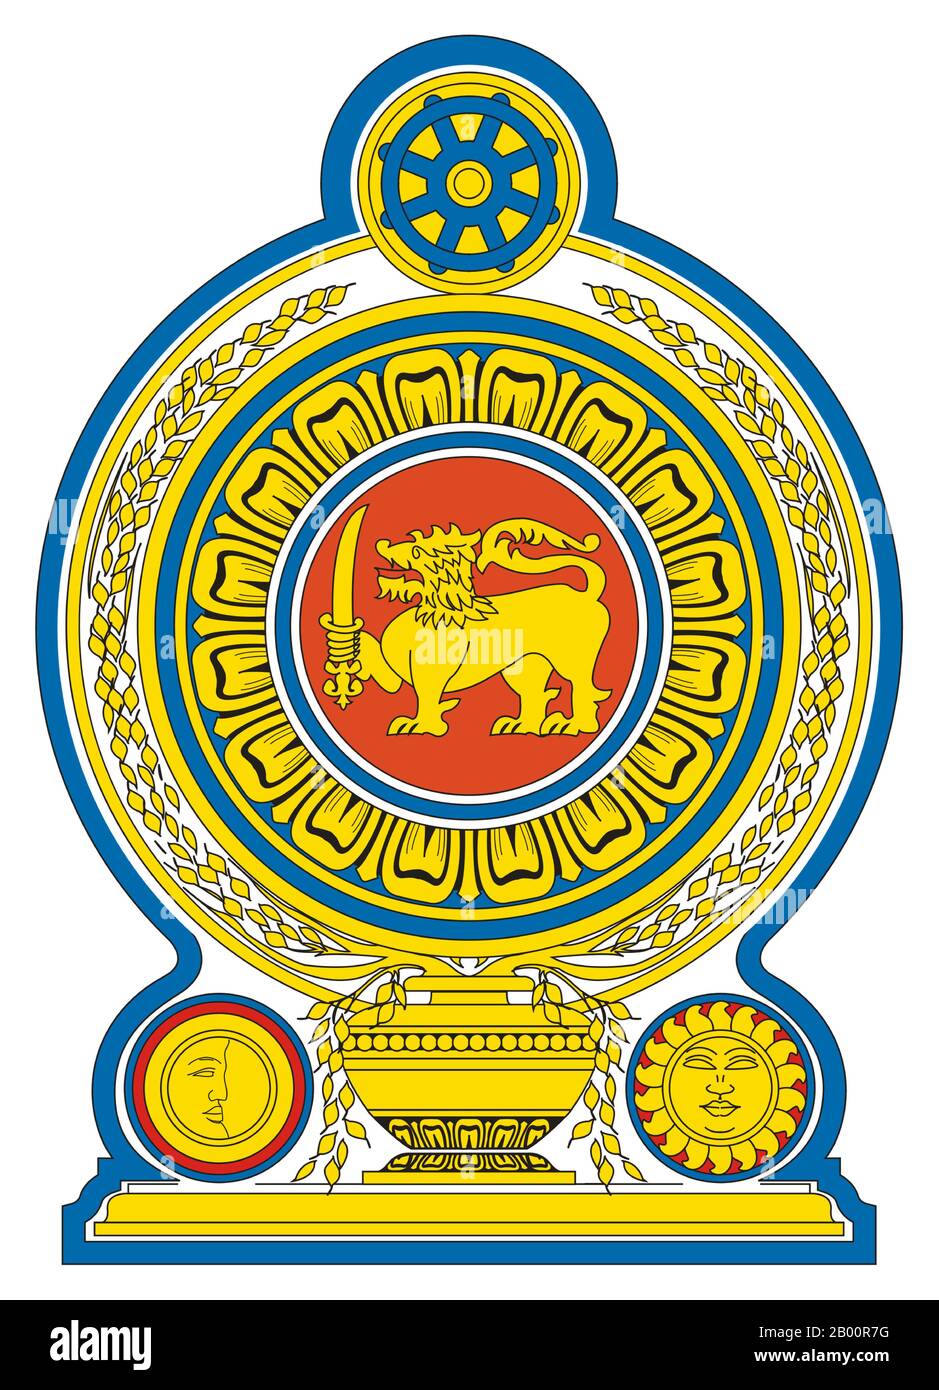 Sri Lanka: Crest of the Democratic Socialist Republic of Sri Lanka, 1972 - present day.  The coat of arms features a gold lion passant, holding a sword in its right fore paw (the same lion from the flag of Sri Lanka) in the centre on a maroon background surrounded by golden petals of a Blue Lotus the national flower of the country. This is placed on top of a traditional grain vase that sprouts sheaves of rice grains that circle the border reflecting prosperity. The crest is the Dharmacakra, symbolizing the country's foremost place for Buddhism and just rule. Stock Photo